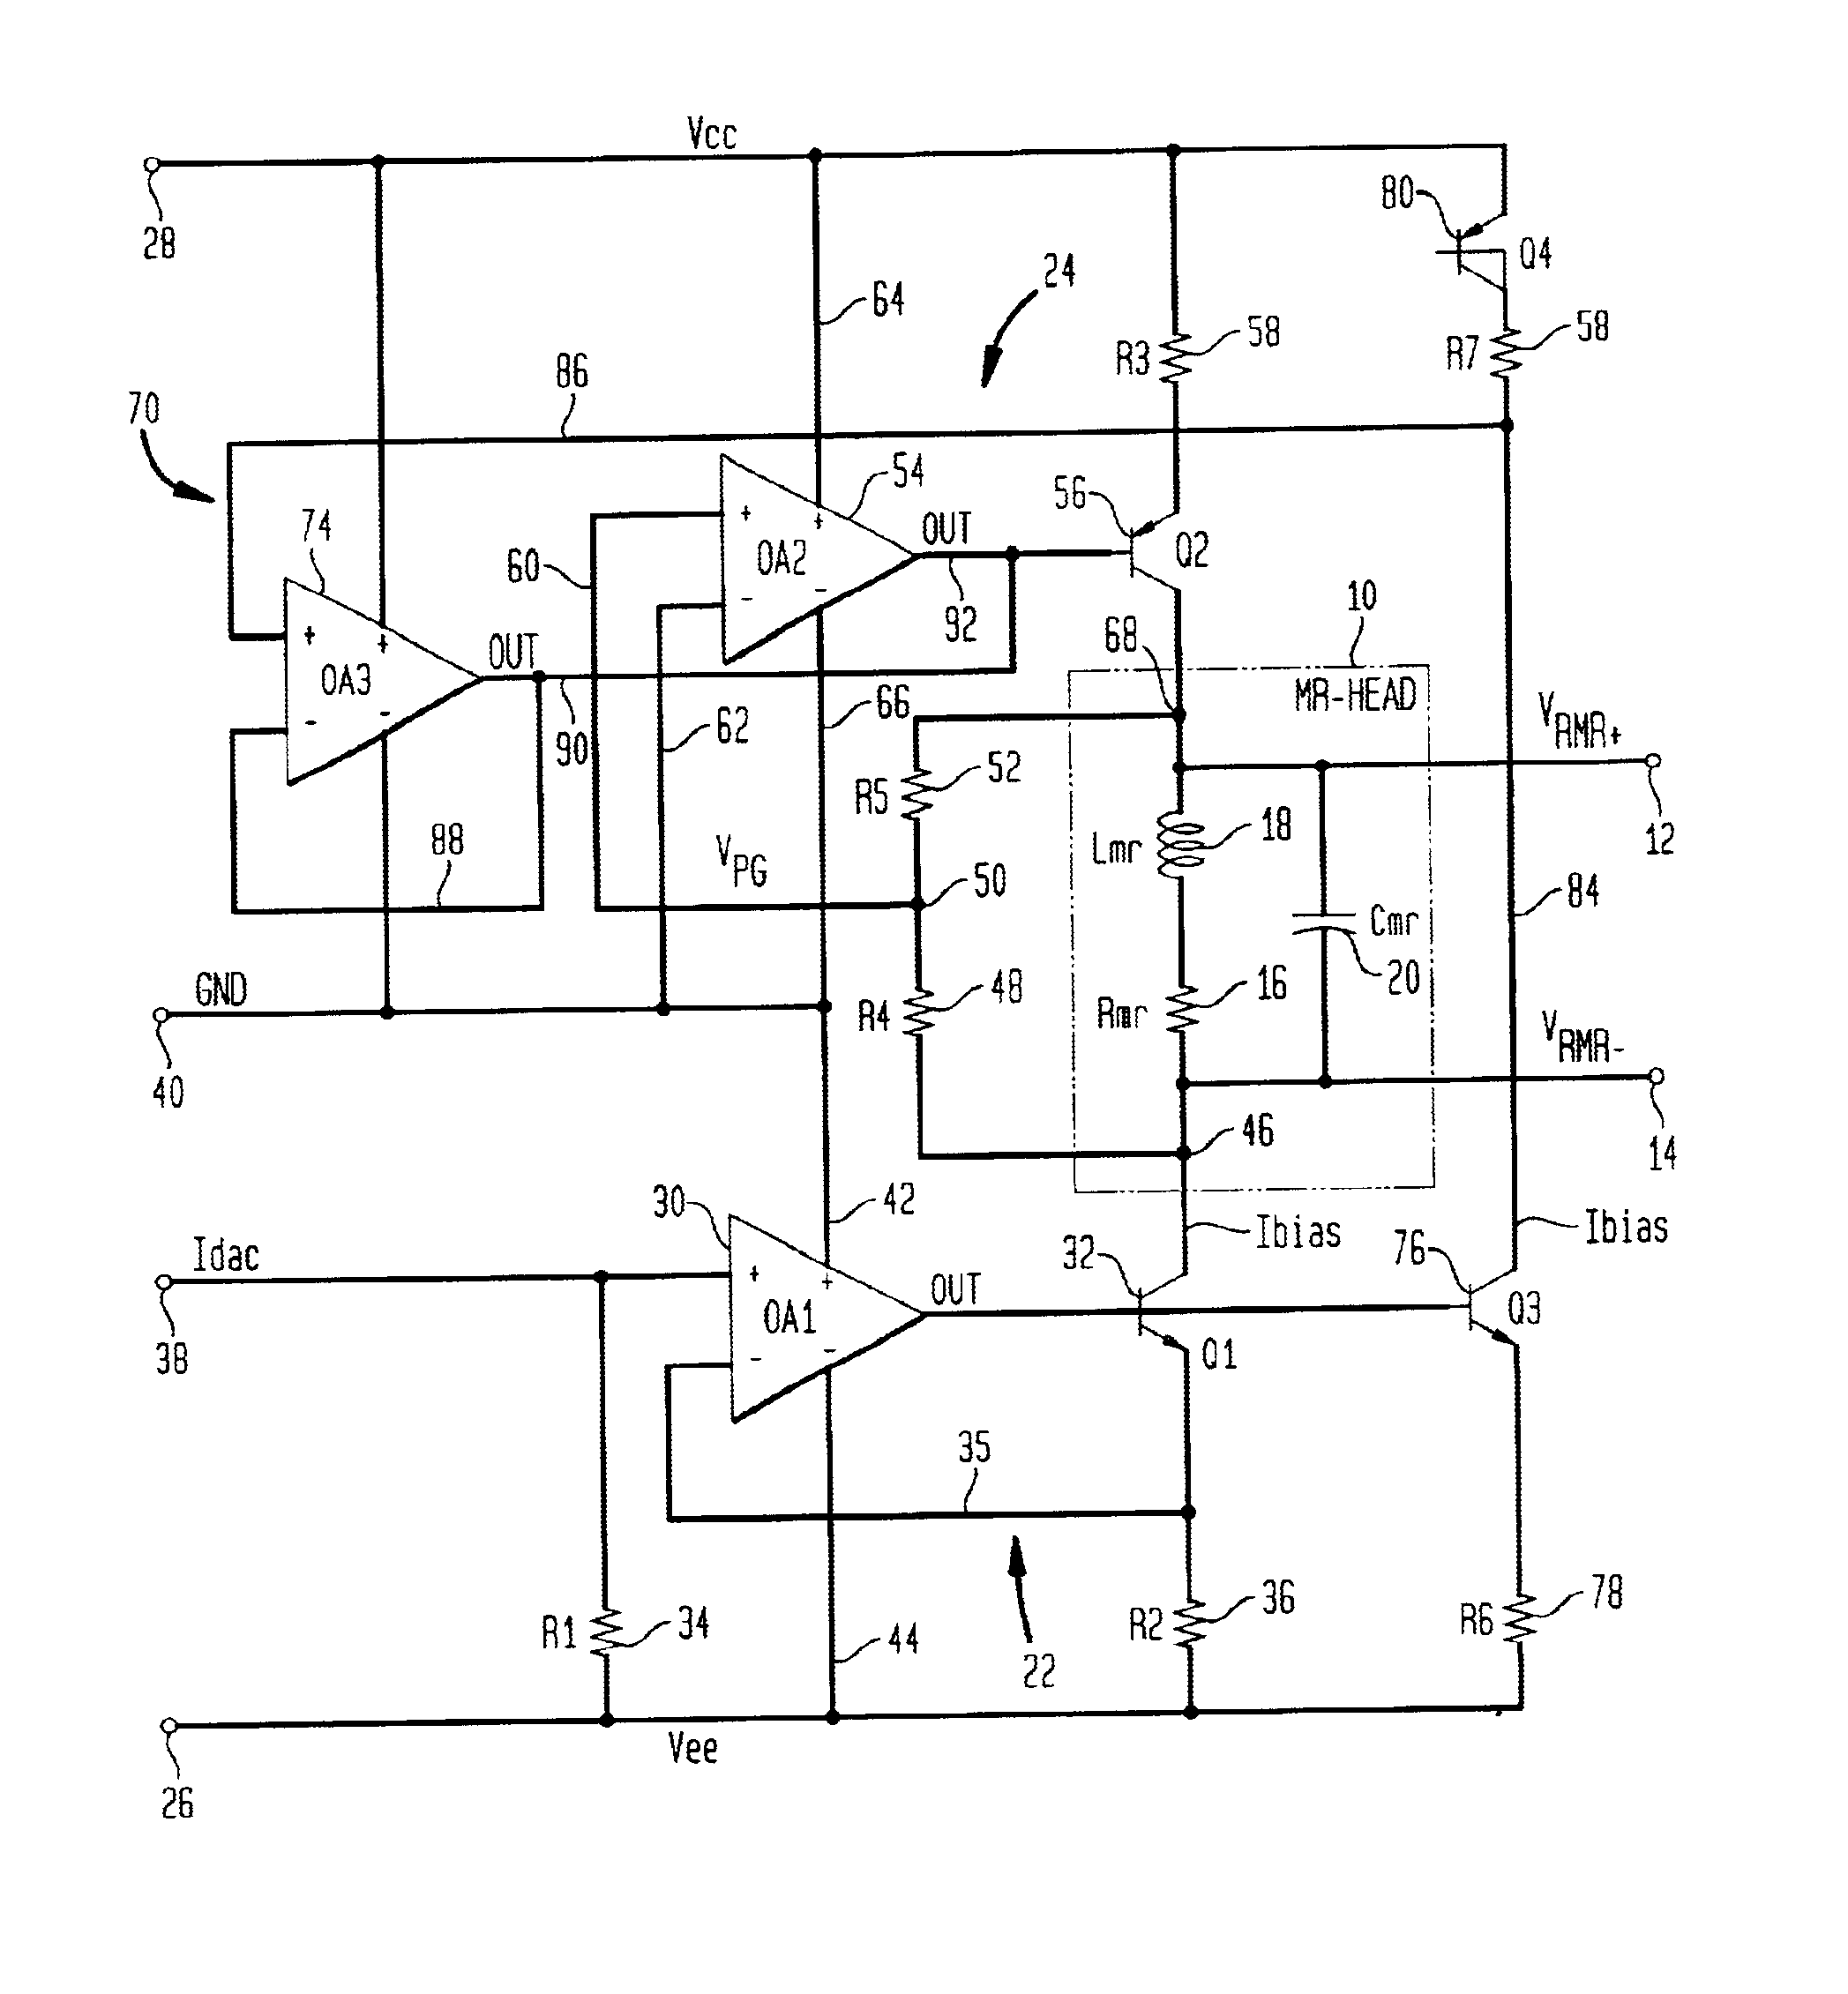 Current limiter for magneto-resistive circuit element